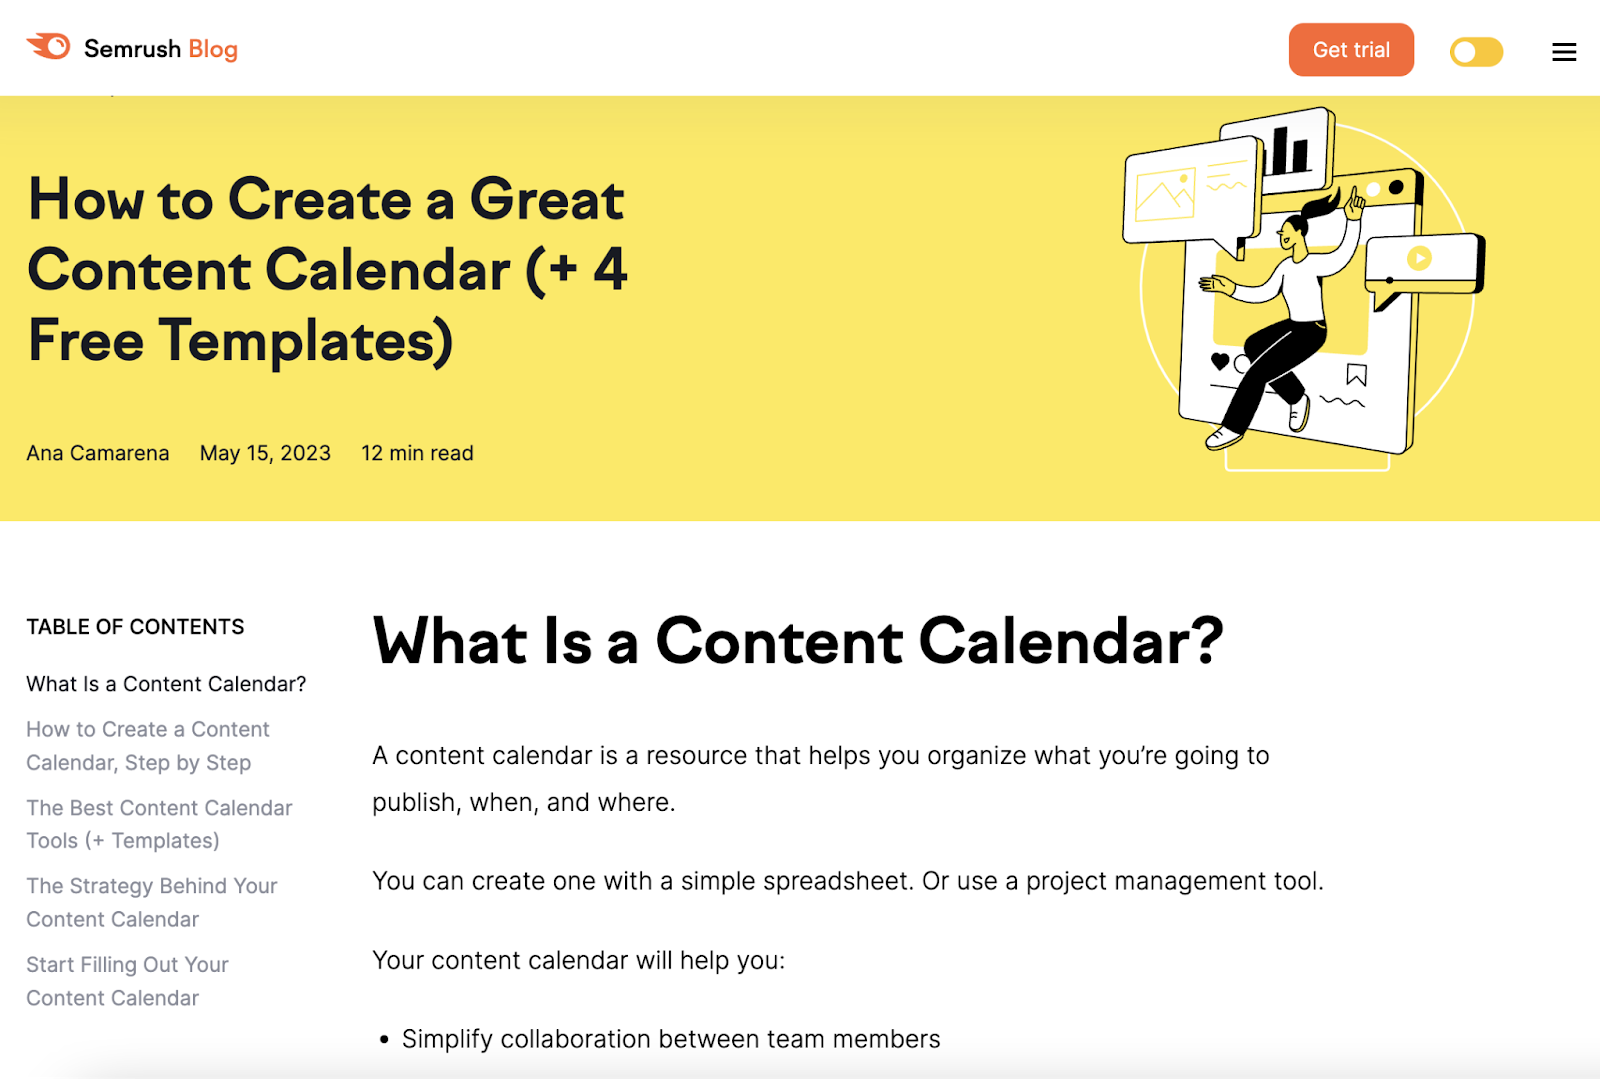 an example of Semrush blog with headline "How to Create a Great Content Calendar (+4 Free Templates)"